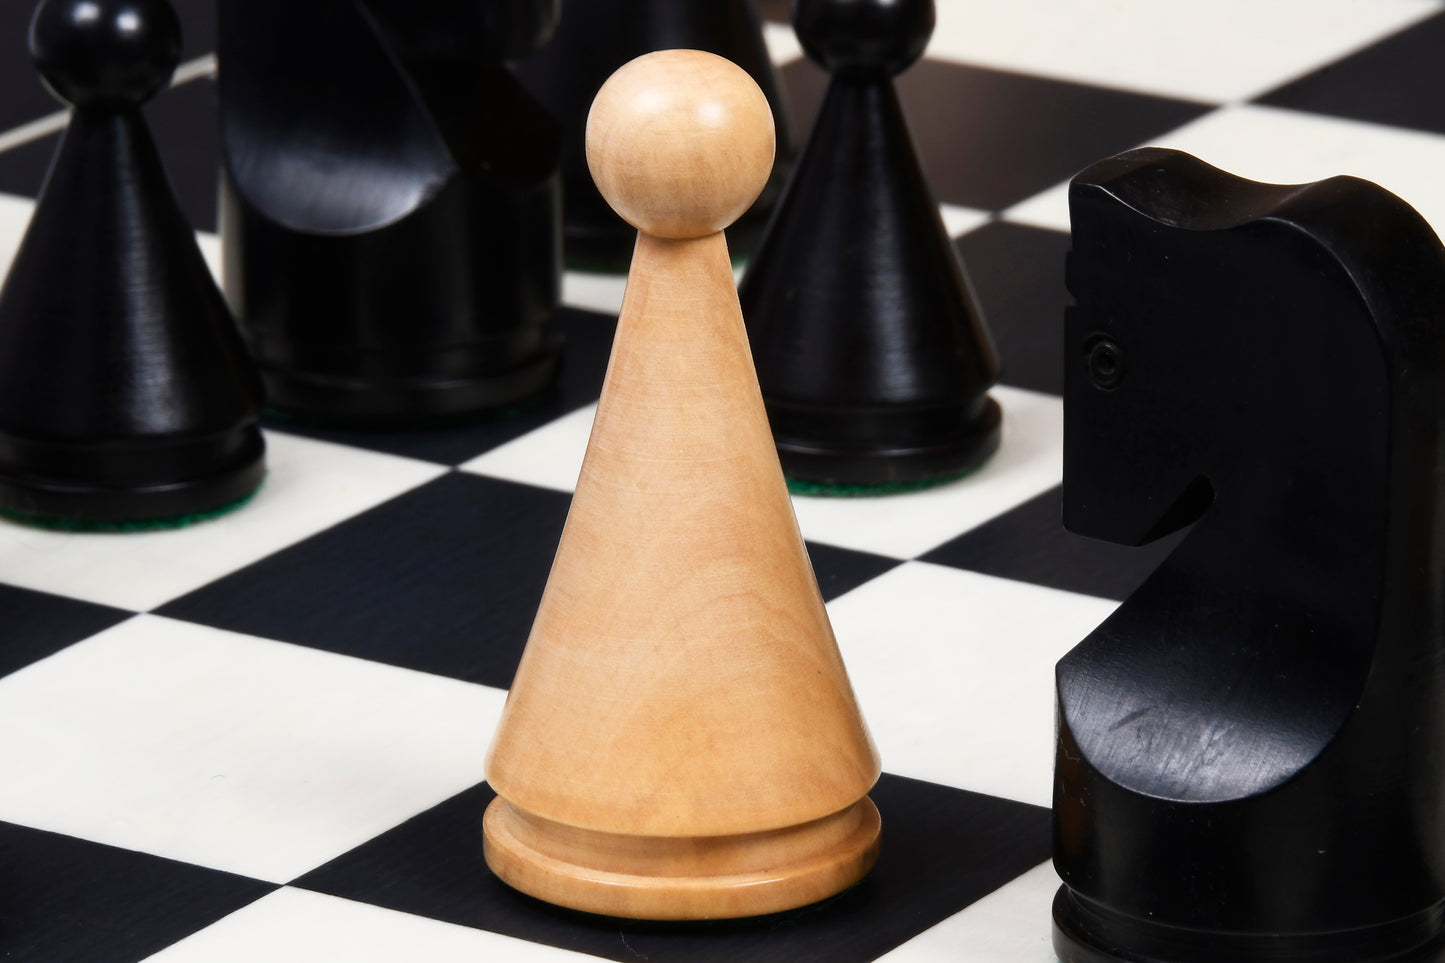 The Classic Series Cone Shaped Chess Pieces in Ebonized Boxwood & Natural Boxwood - 4.09" King